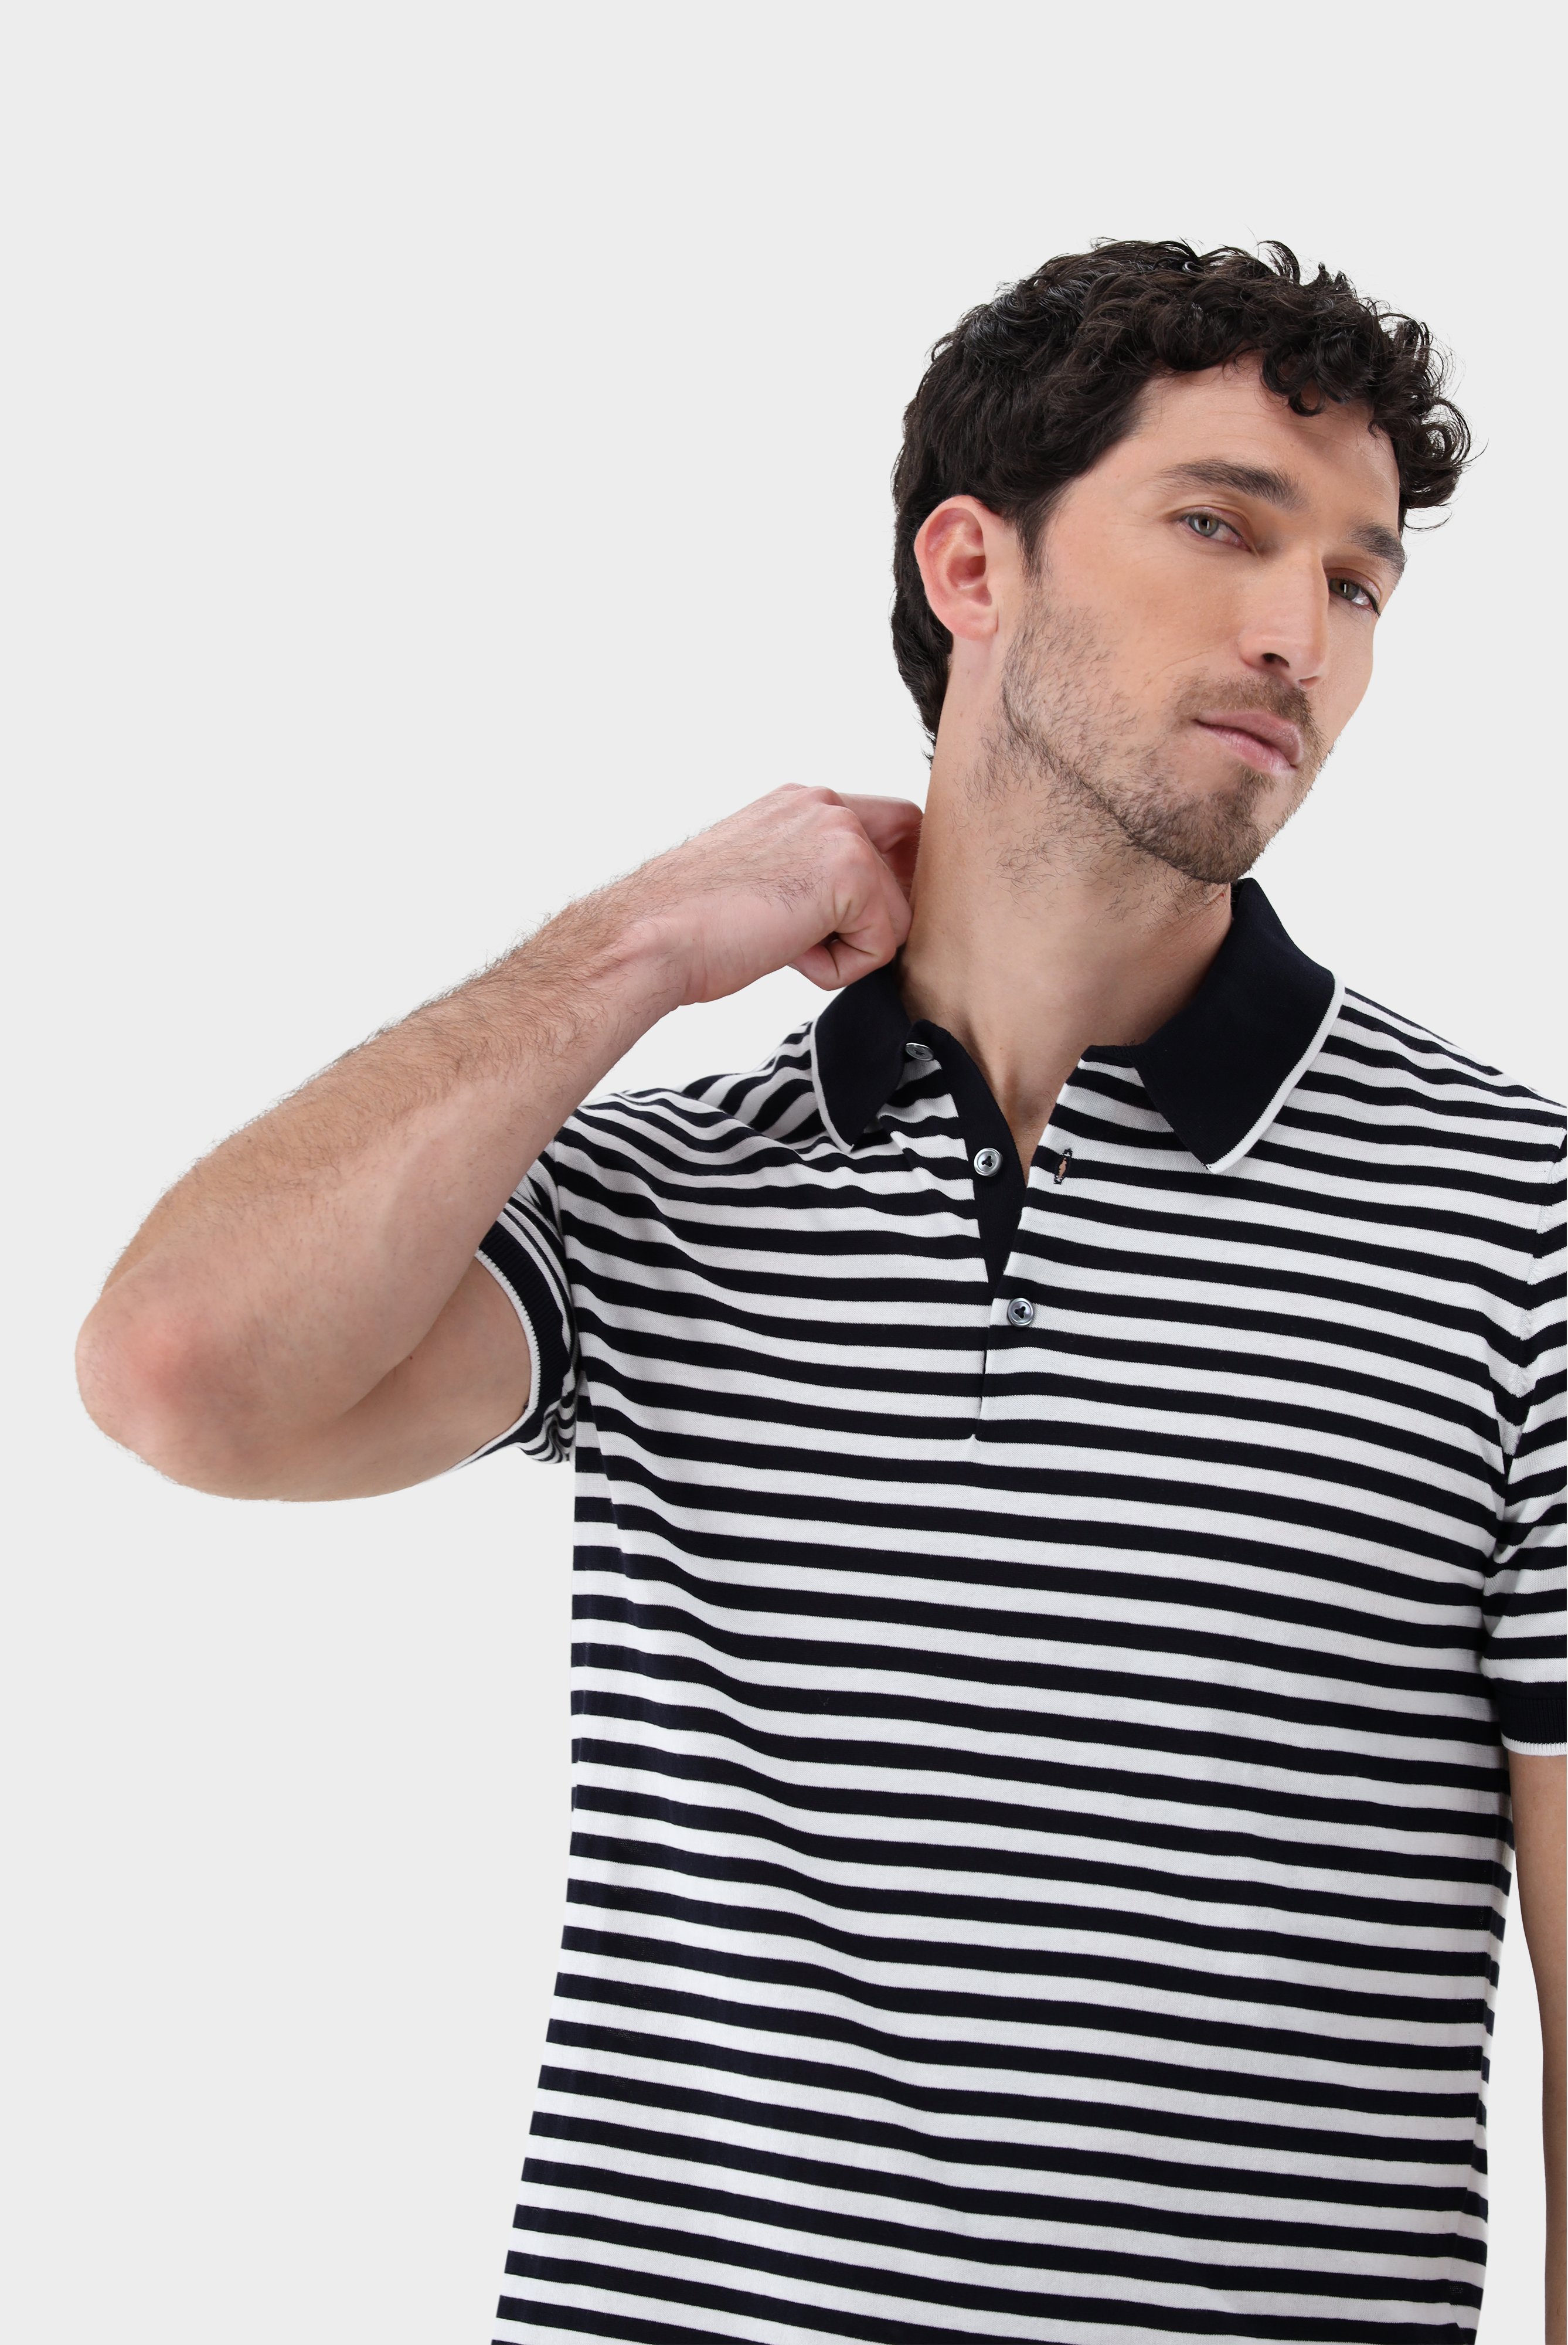 Poloshirts+Striped Knit Polo made of Air Cotton+82.8510..S00266.795.S